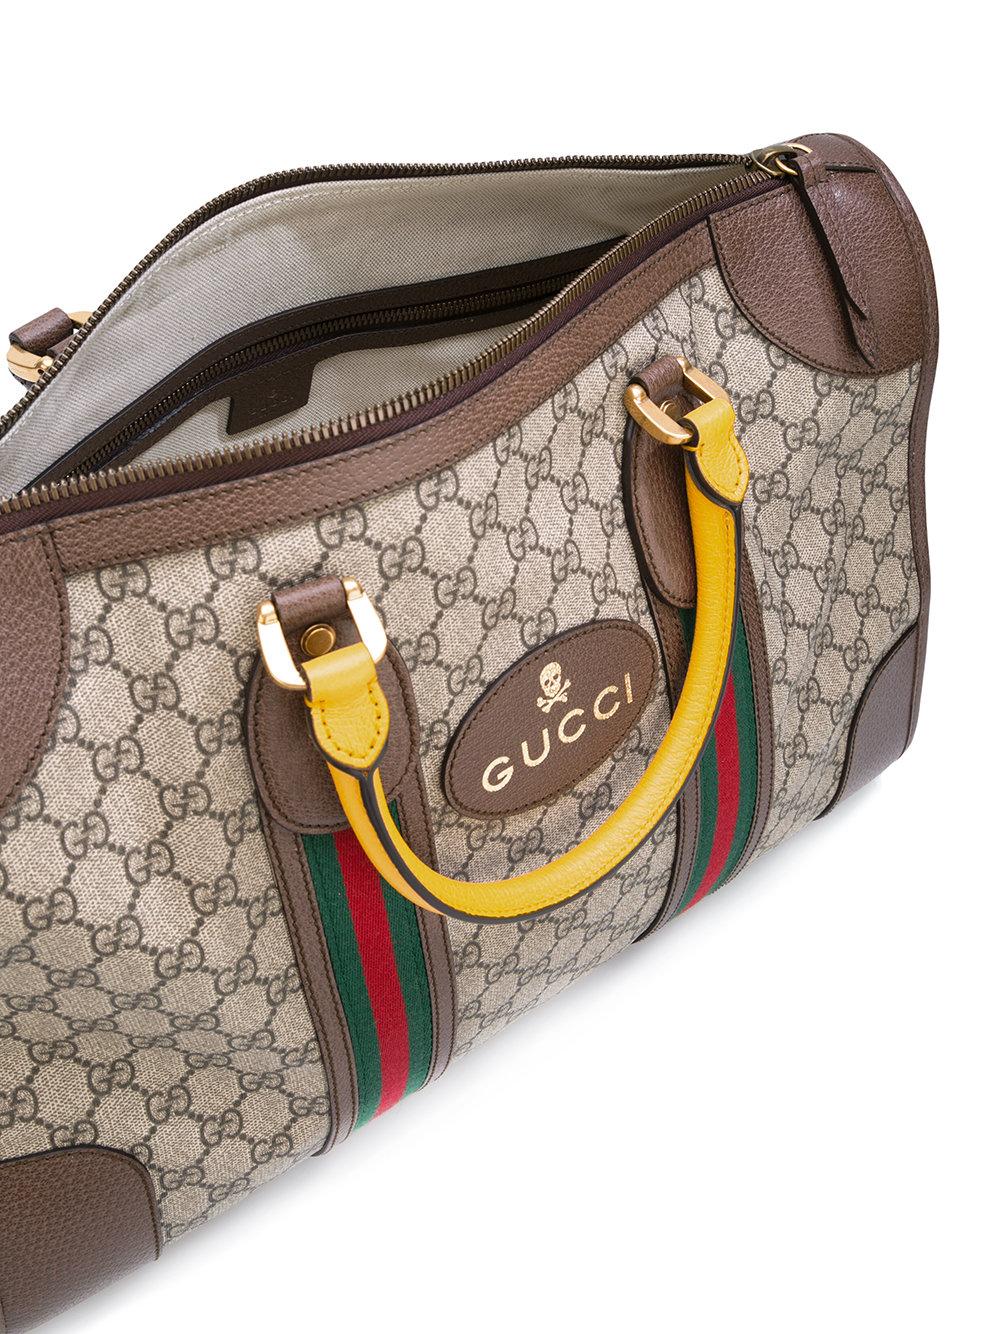 Gucci - Gg Supreme Duffle Bag - Men - Polyurethane/leather - One Size in Brown for Men | Lyst